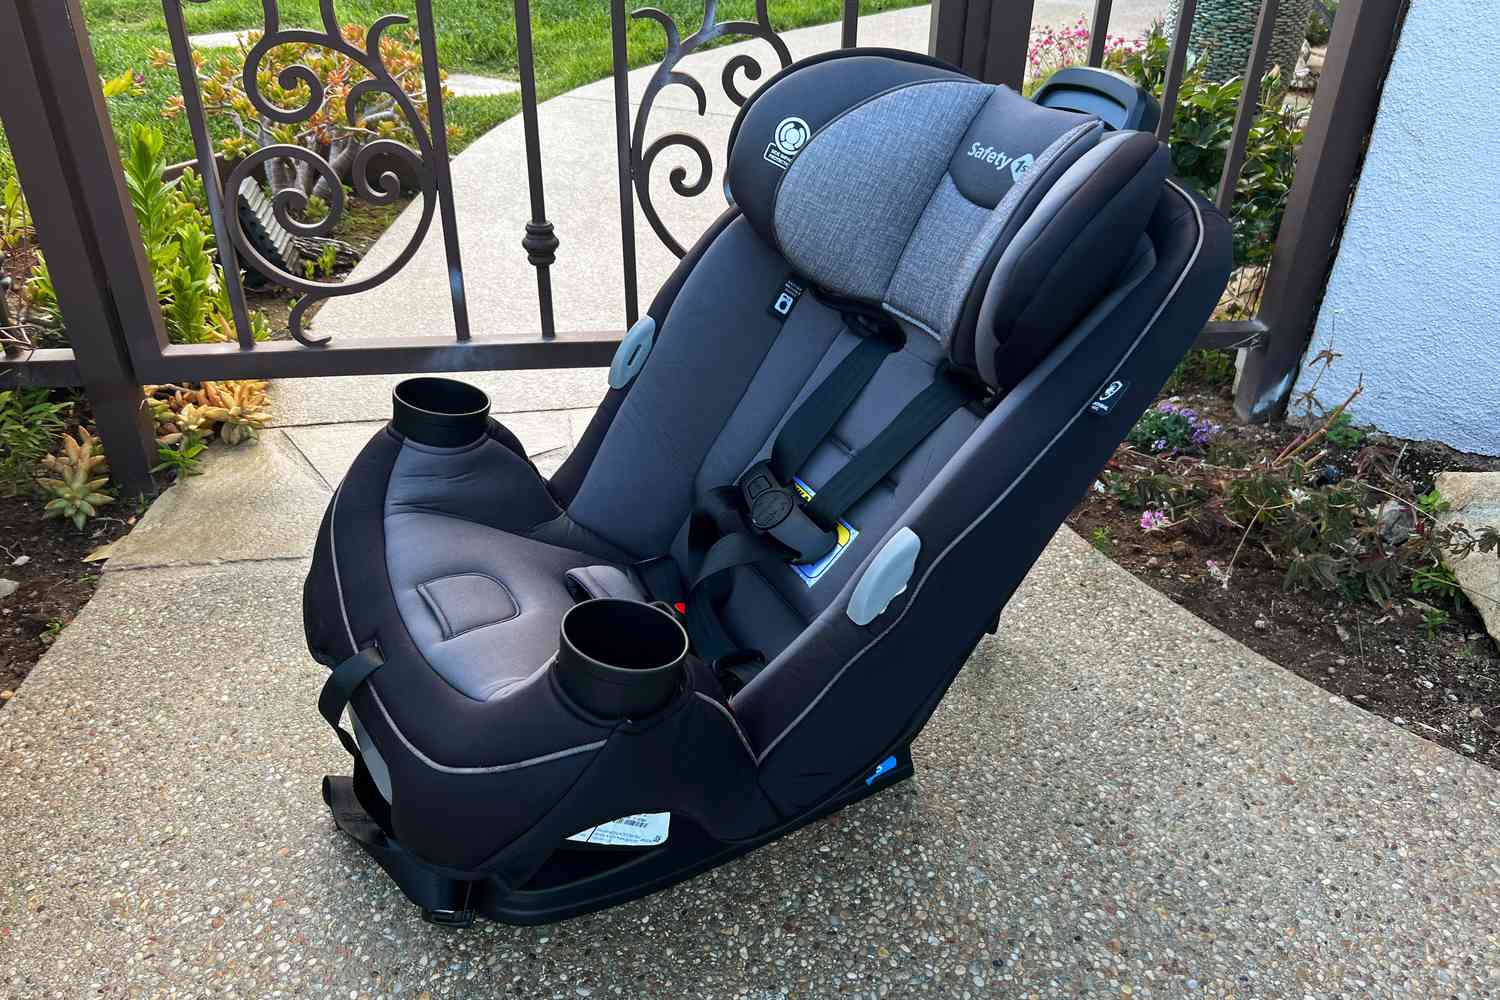 Safety 1st Grow and Go All-in-One Convertible Car Seat displayed on sidewalk in front of gate